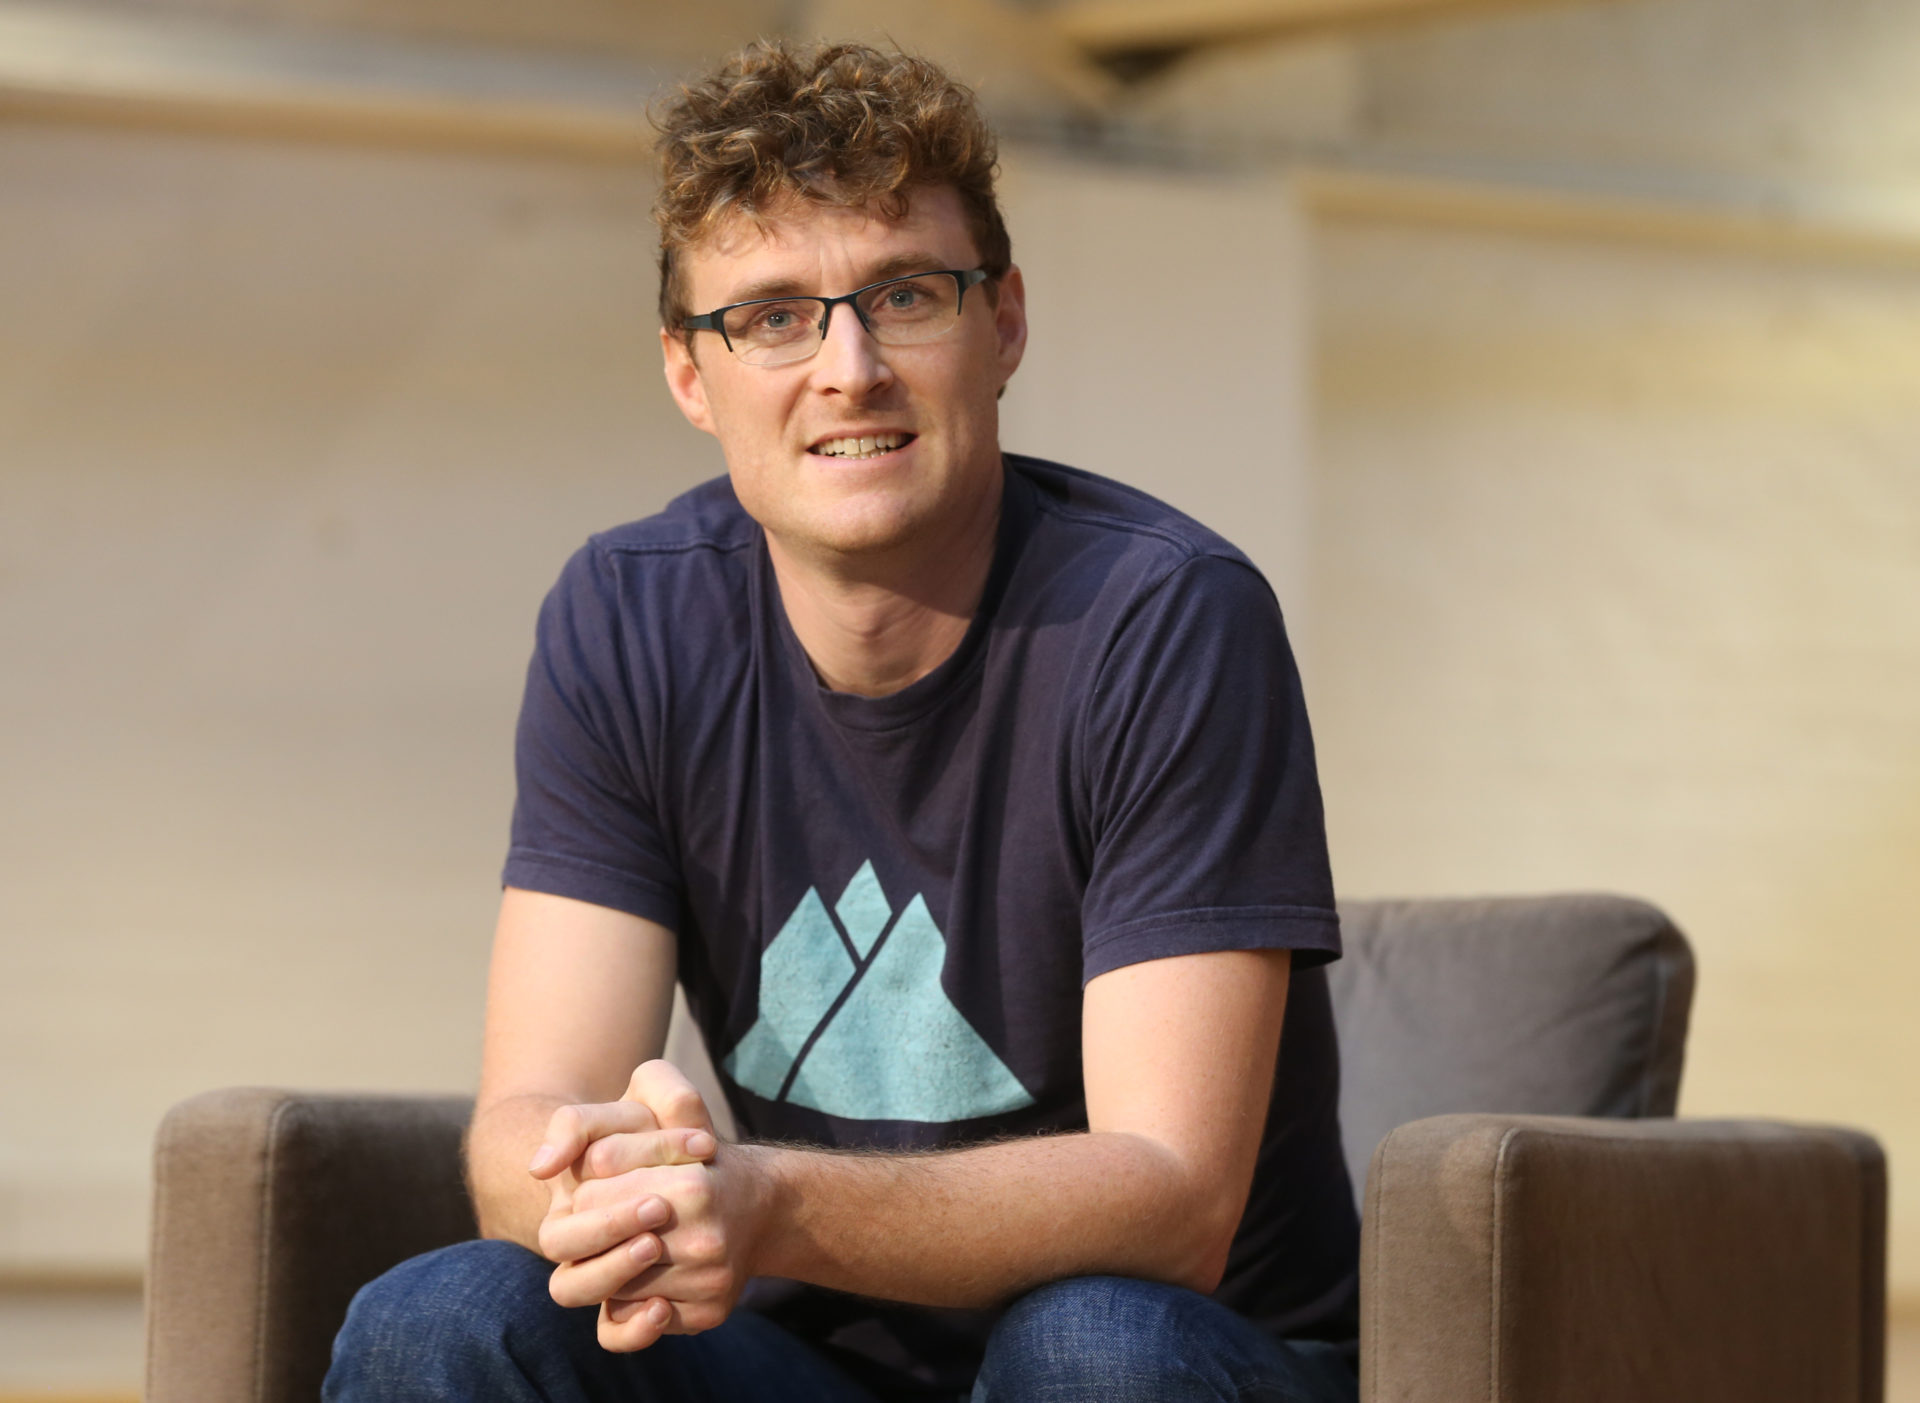 Paddy Cosgrave at a press conference at Web Summit HQ in Dublin, 1-10-18. 